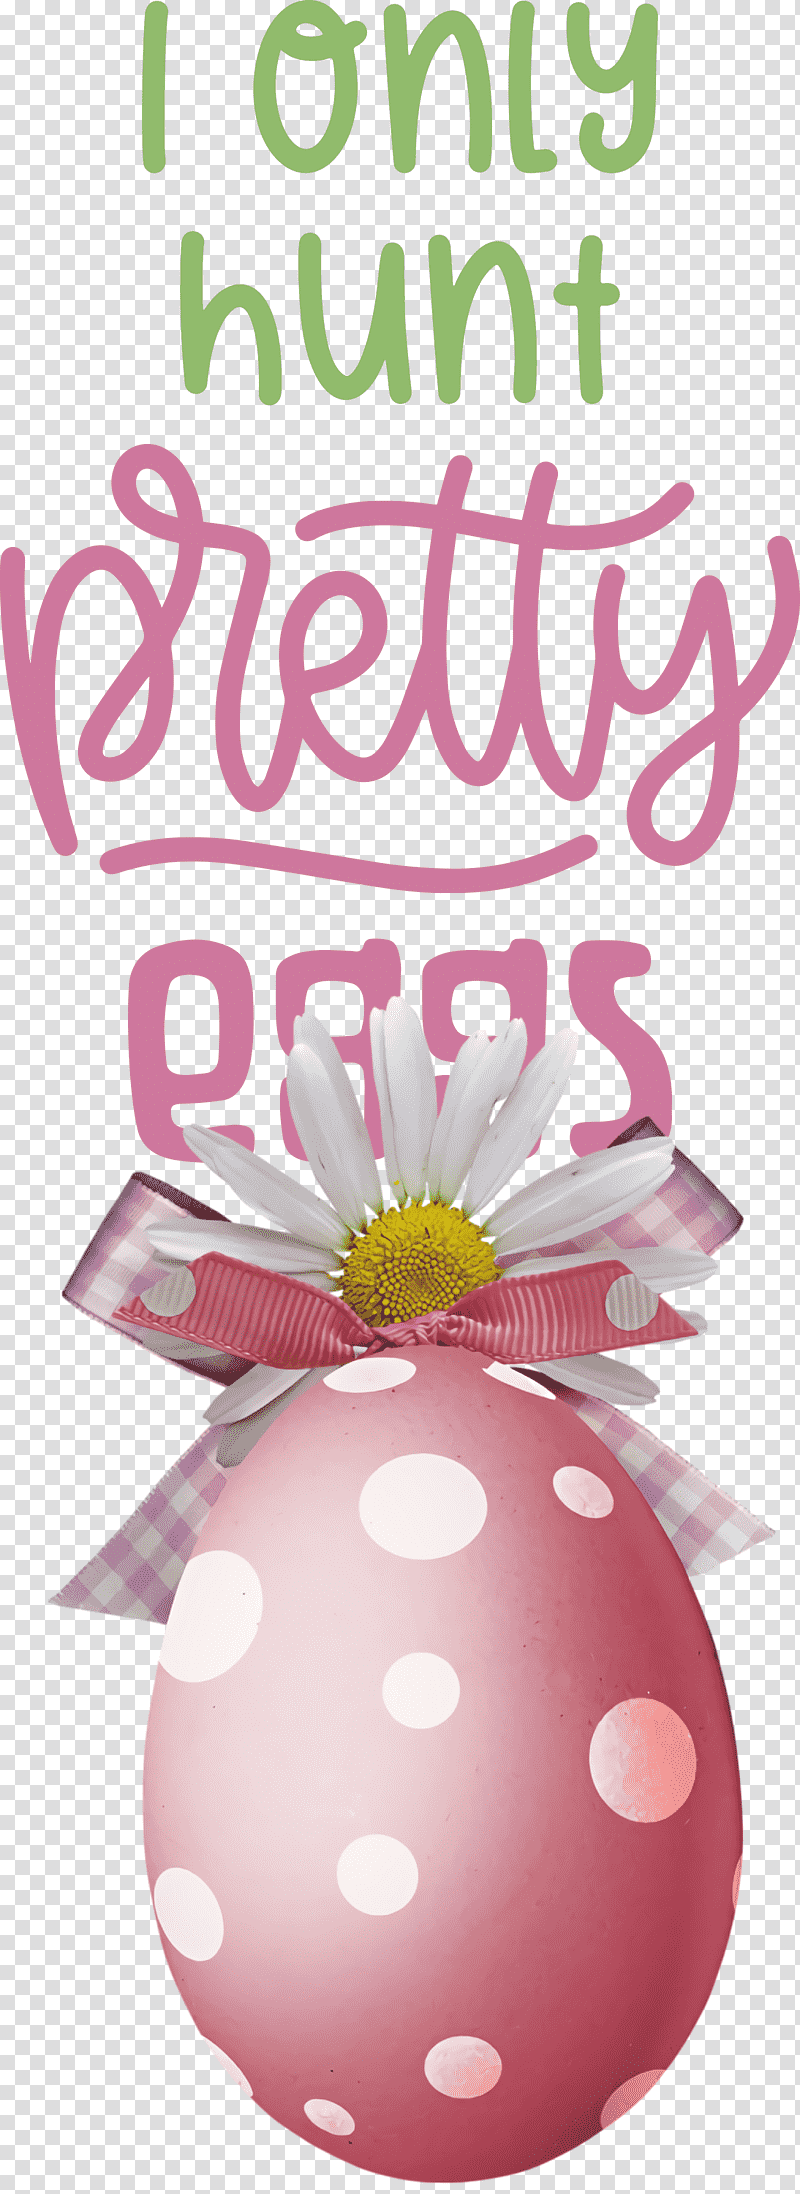 Hunt Pretty Eggs Egg Easter Day, Happy Easter, Easter Bunny, Easter Egg, Pink, Ribbon, Bow transparent background PNG clipart